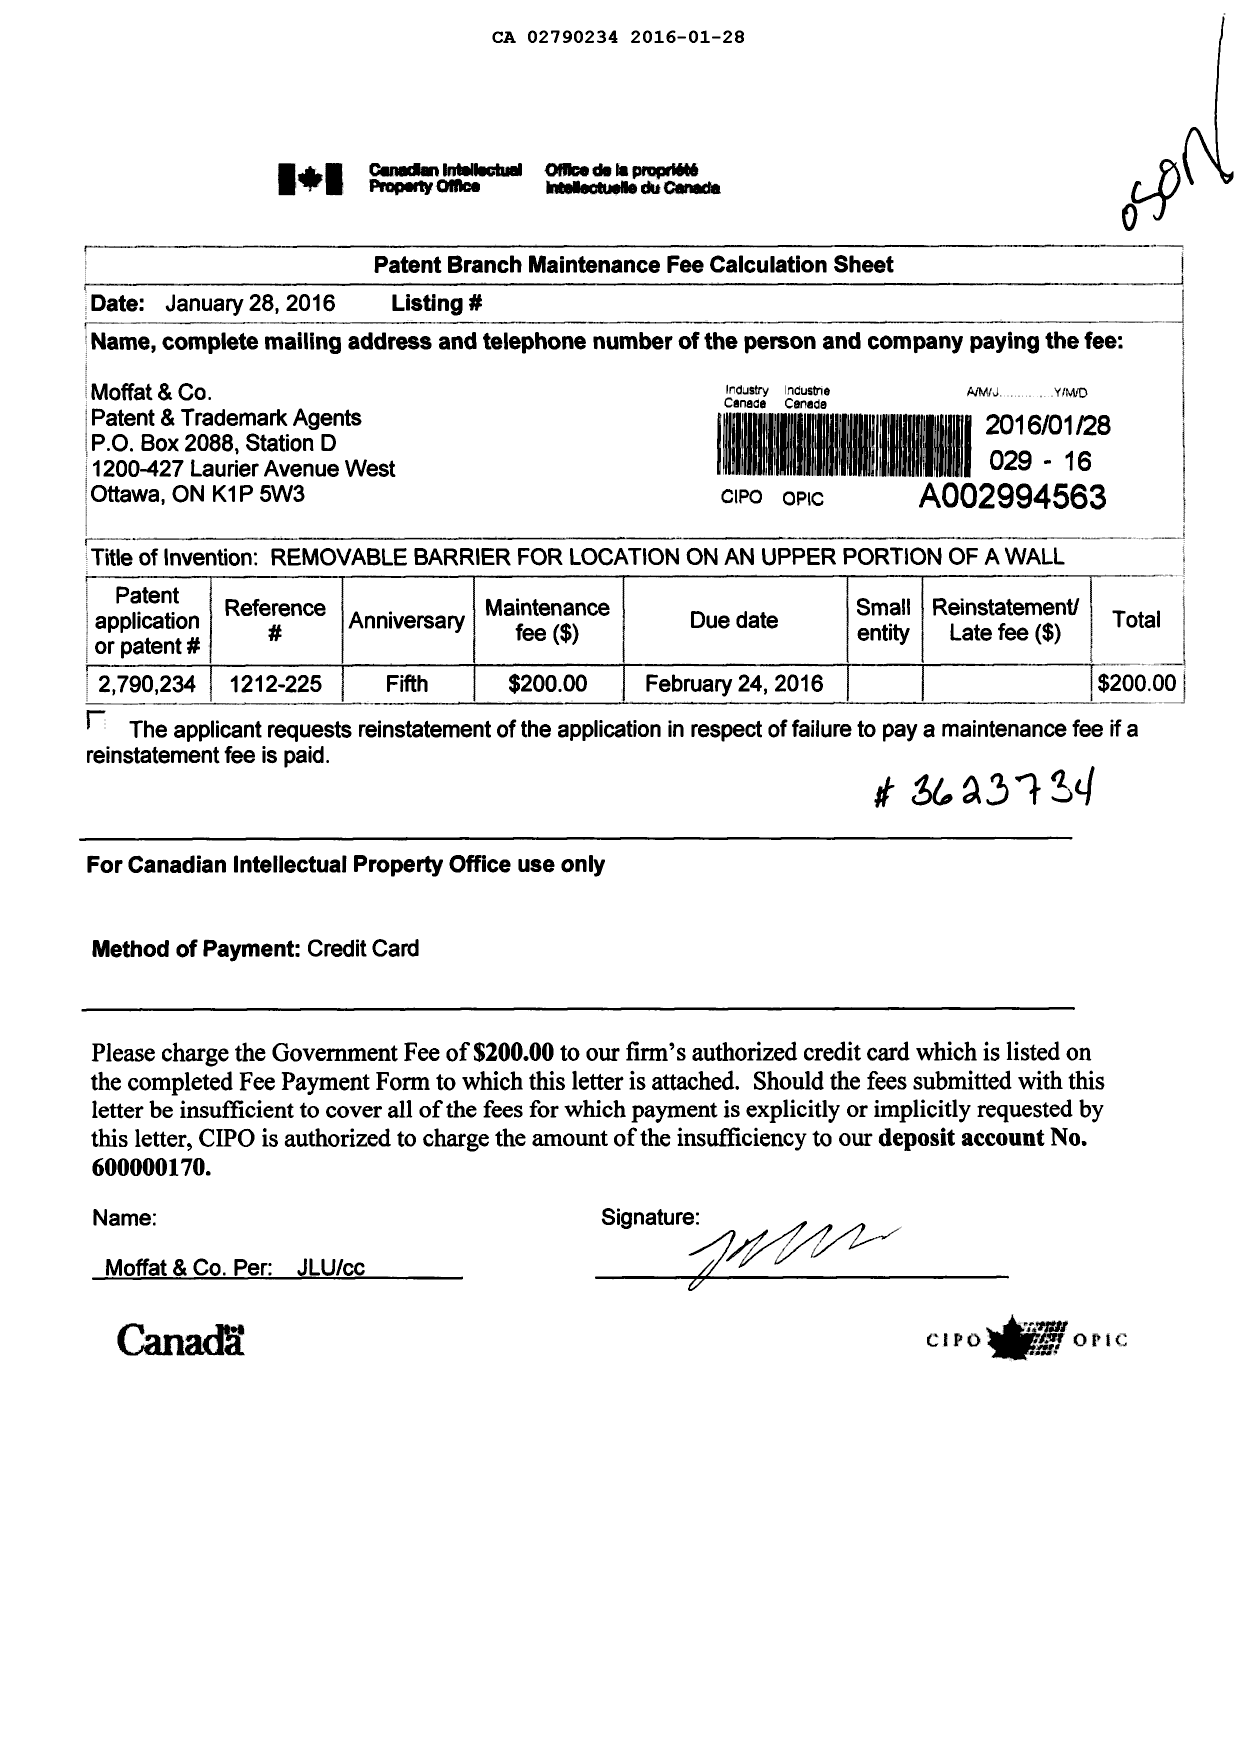 Canadian Patent Document 2790234. Maintenance Fee Payment 20160128. Image 1 of 1